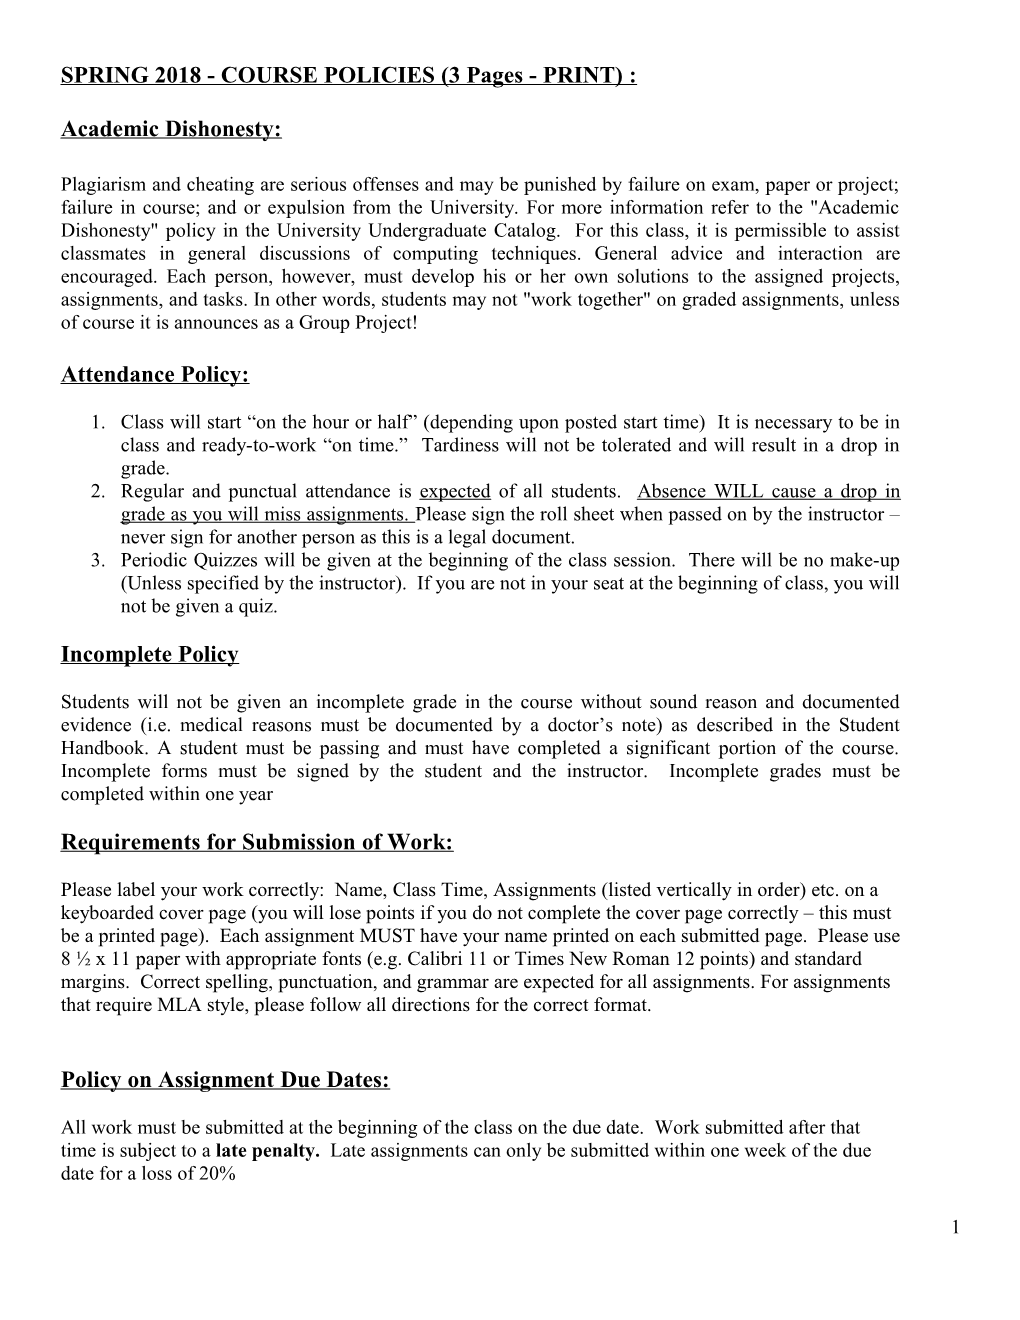 SPRING 2018 - COURSE POLICIES (3 Pages - PRINT)